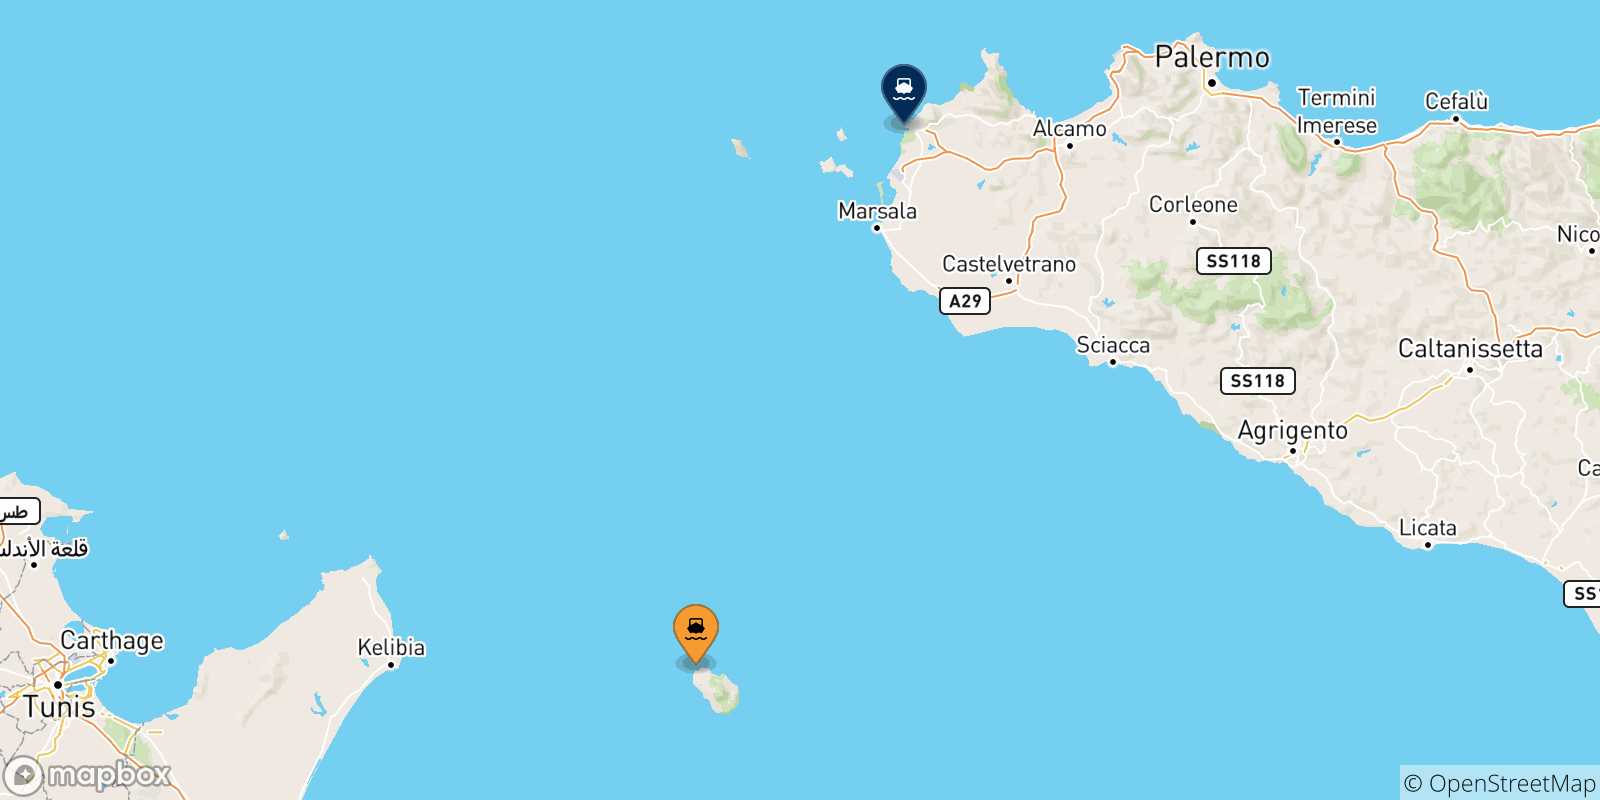 Map of the possible routes between Pantelleria and Sicily